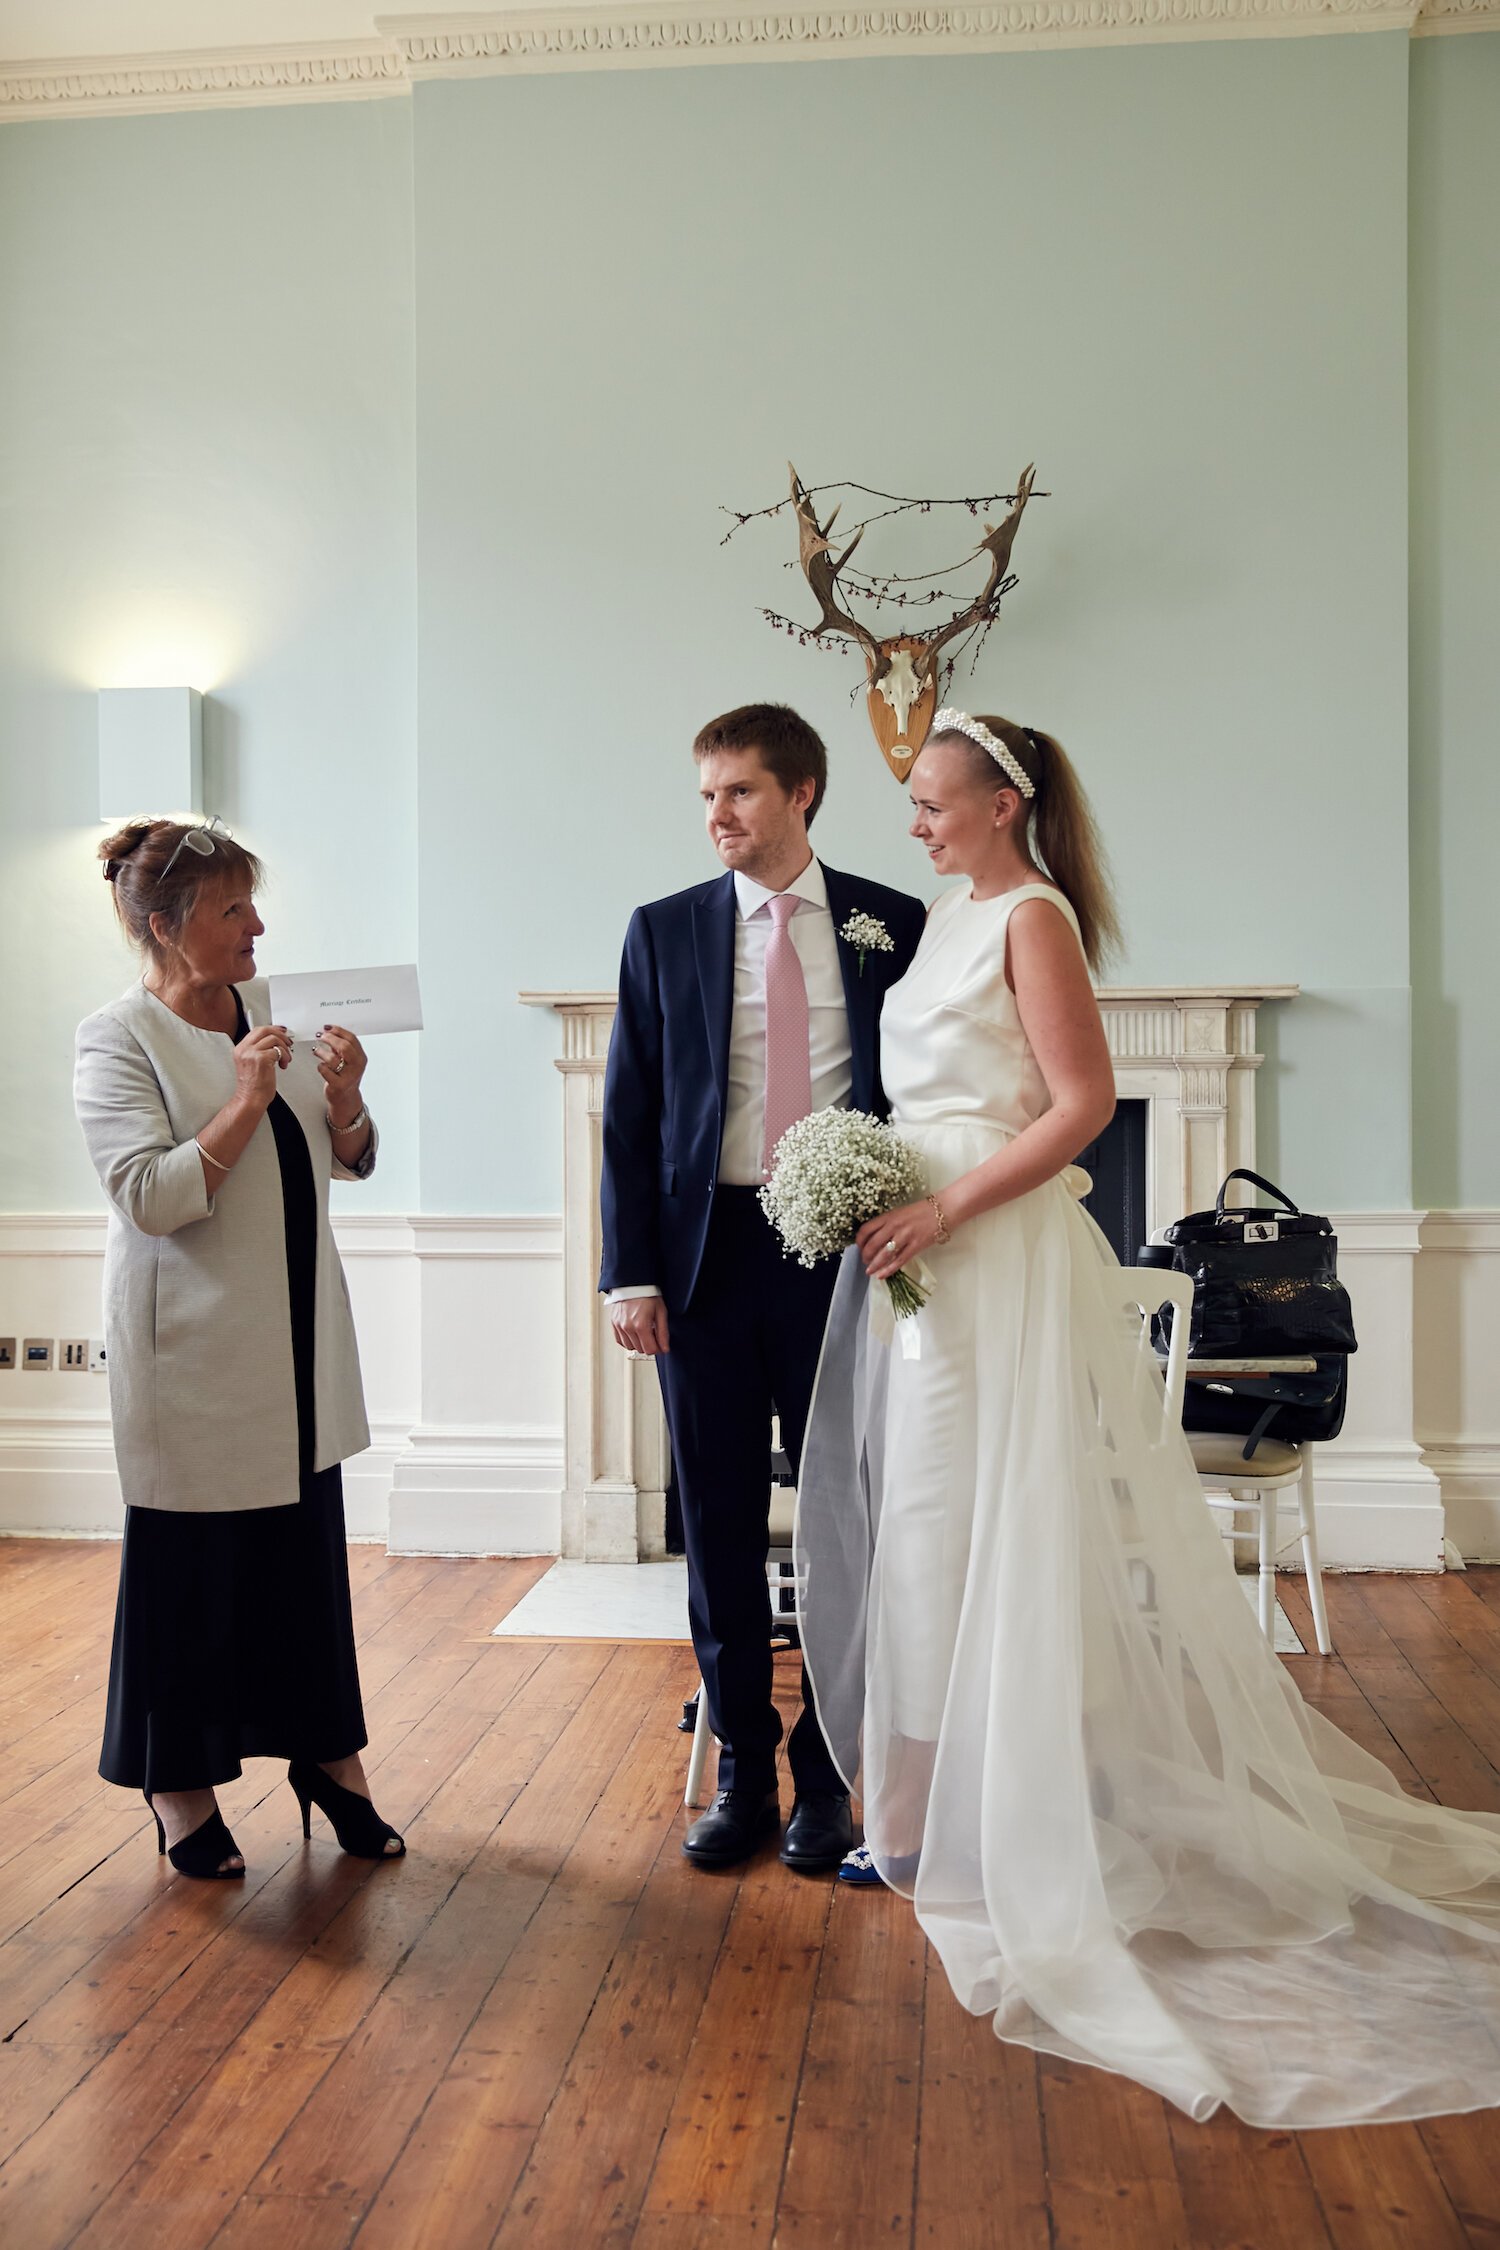 Beautiful bride Caroline wore bridal separates, trousers and an overskirt by Halfpenny London